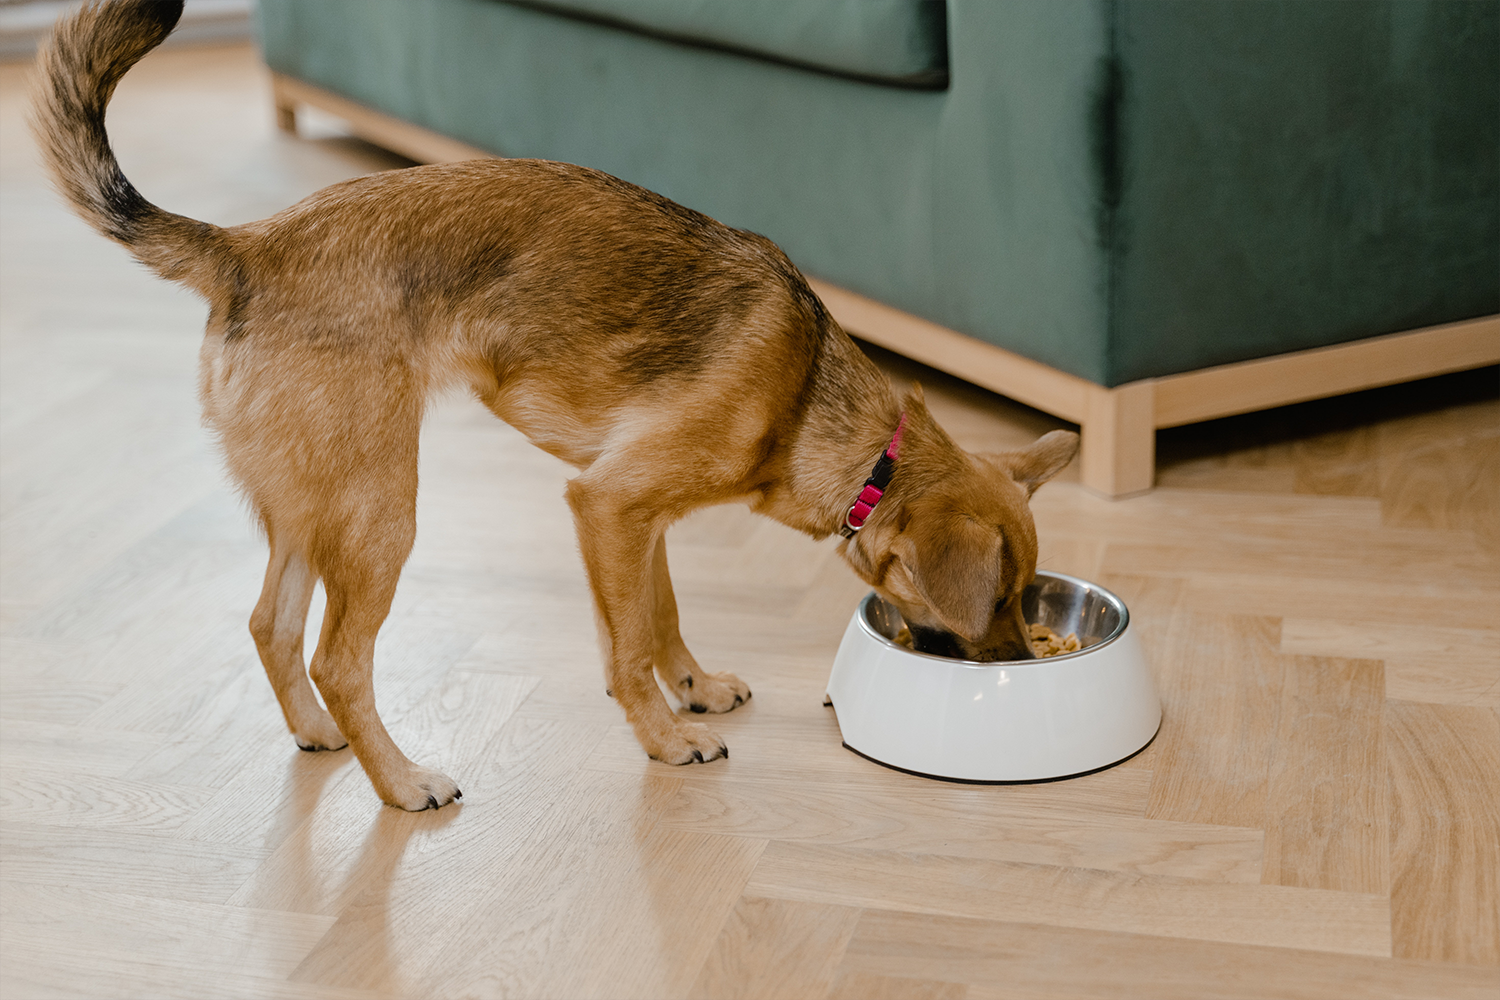 A dog is eating out of a white bowl.